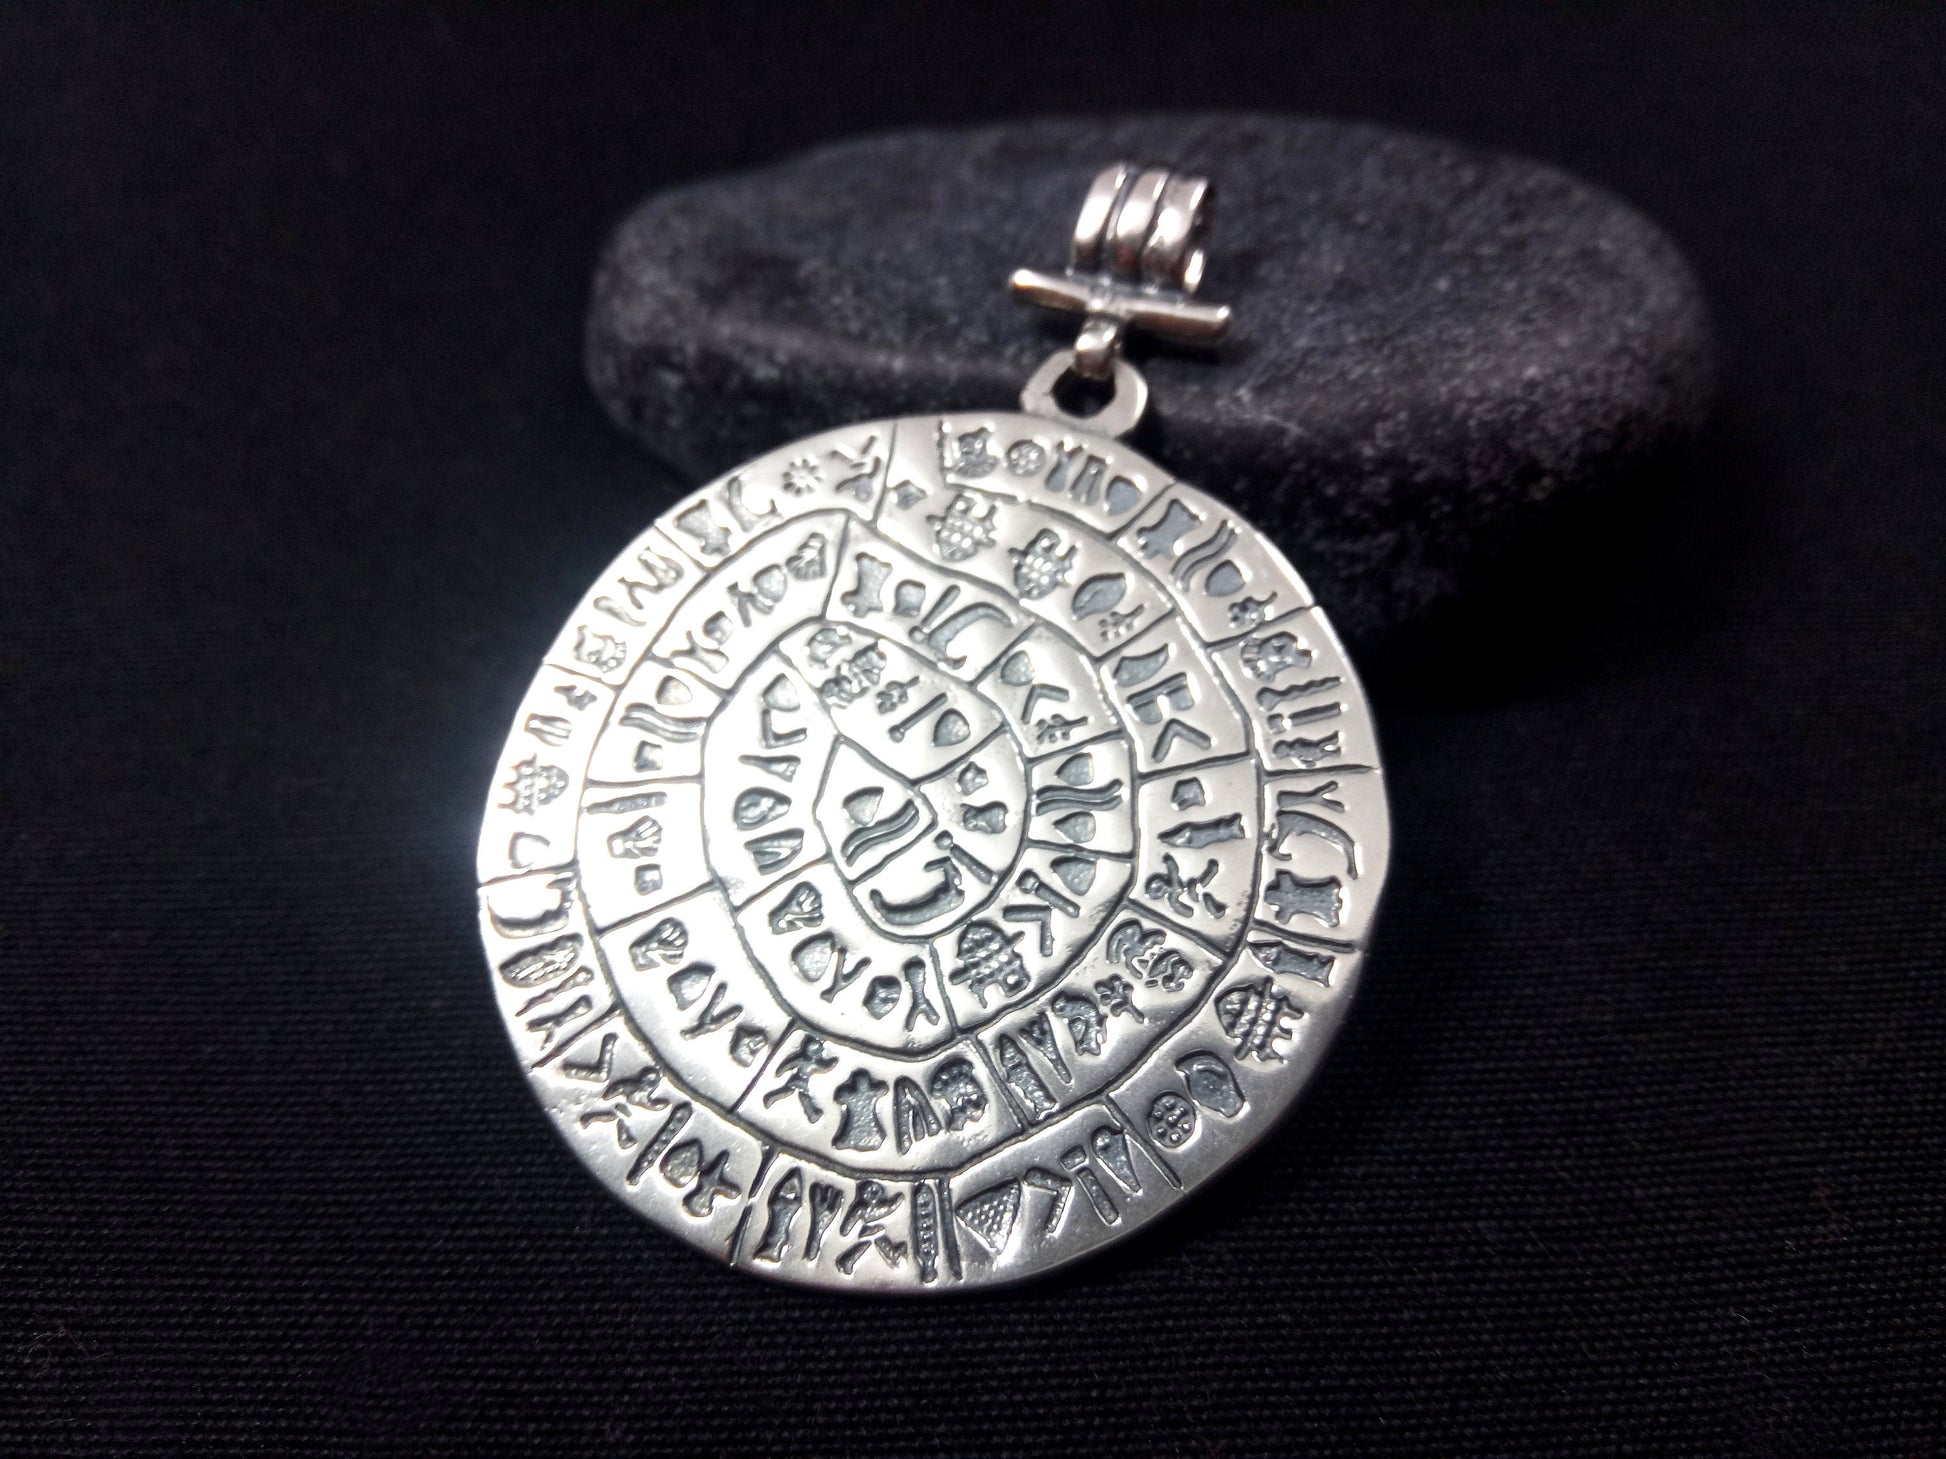 Close-up of Sterling Silver 925 Phaistos Disc Pendant, 43 mm (1.67 inches) in size, showcasing intricate ancient Greek craftsmanship, a symbol of history and culture.